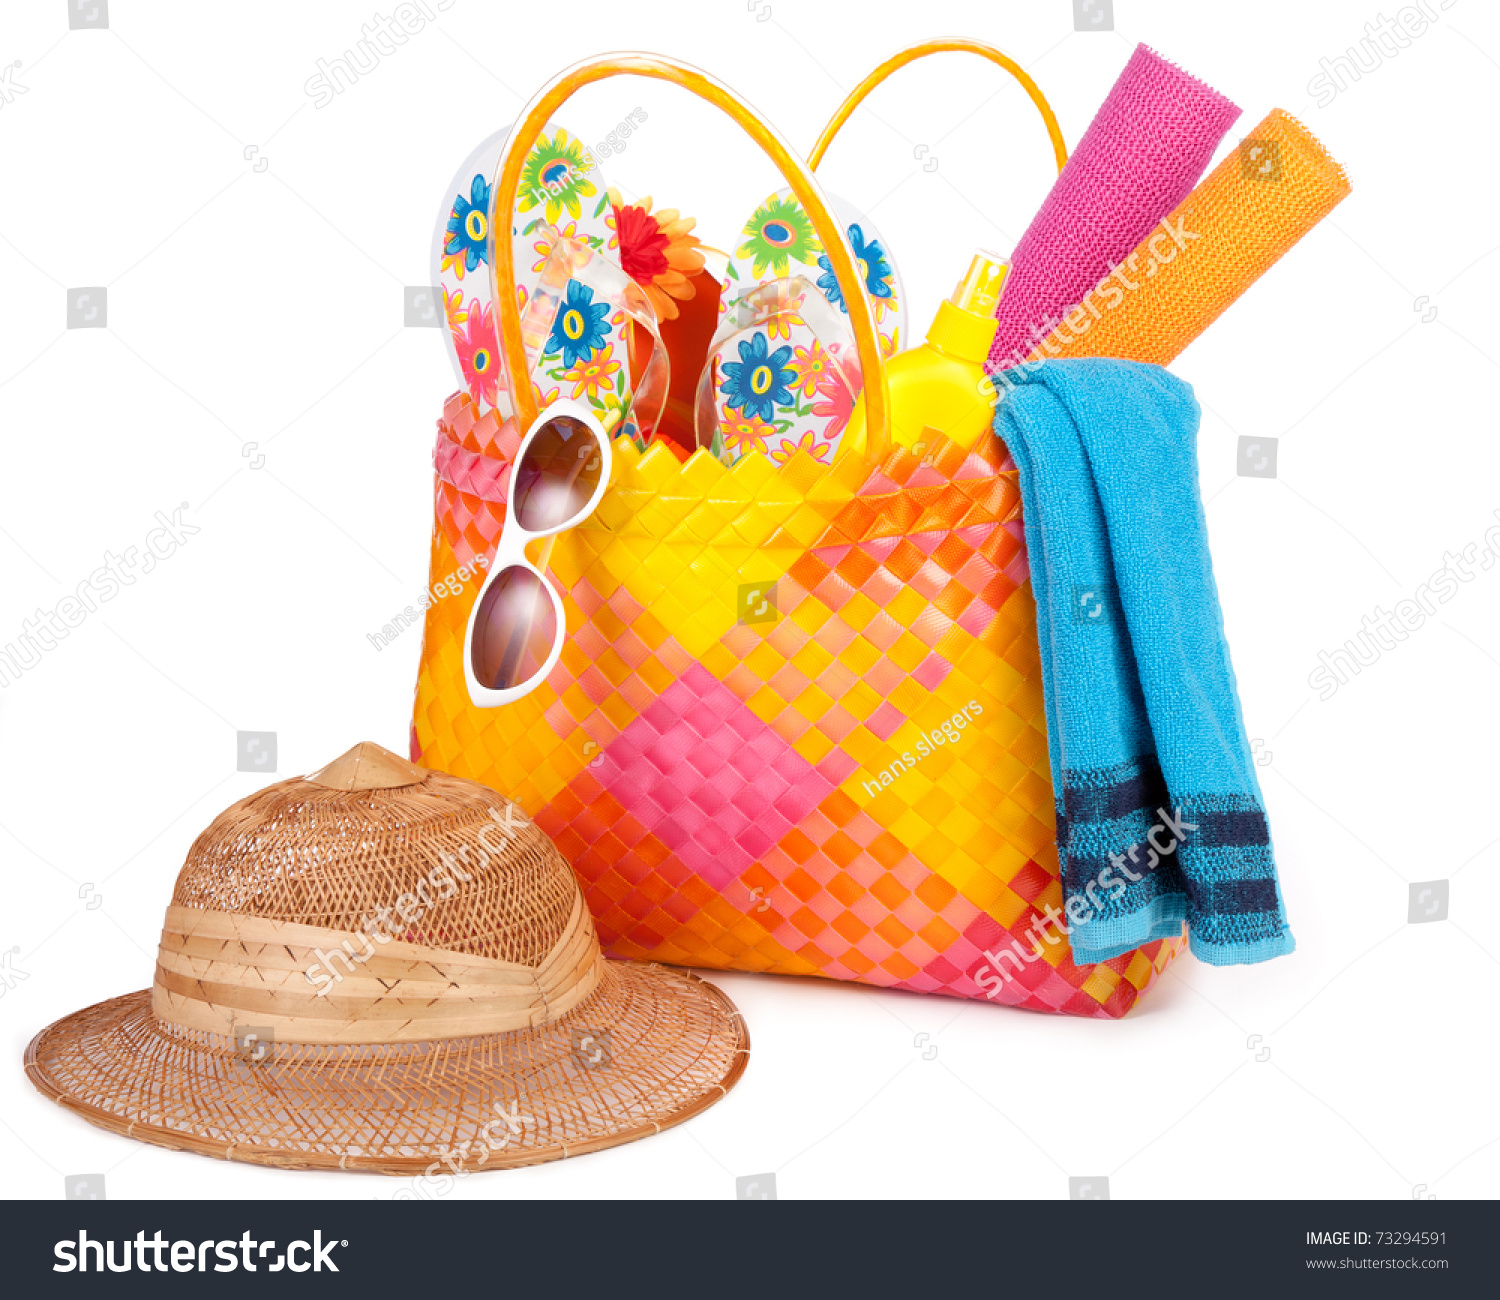 Beach Bag With Towel Sunglasses Flip-Flops And Hat.Isolated On White ...